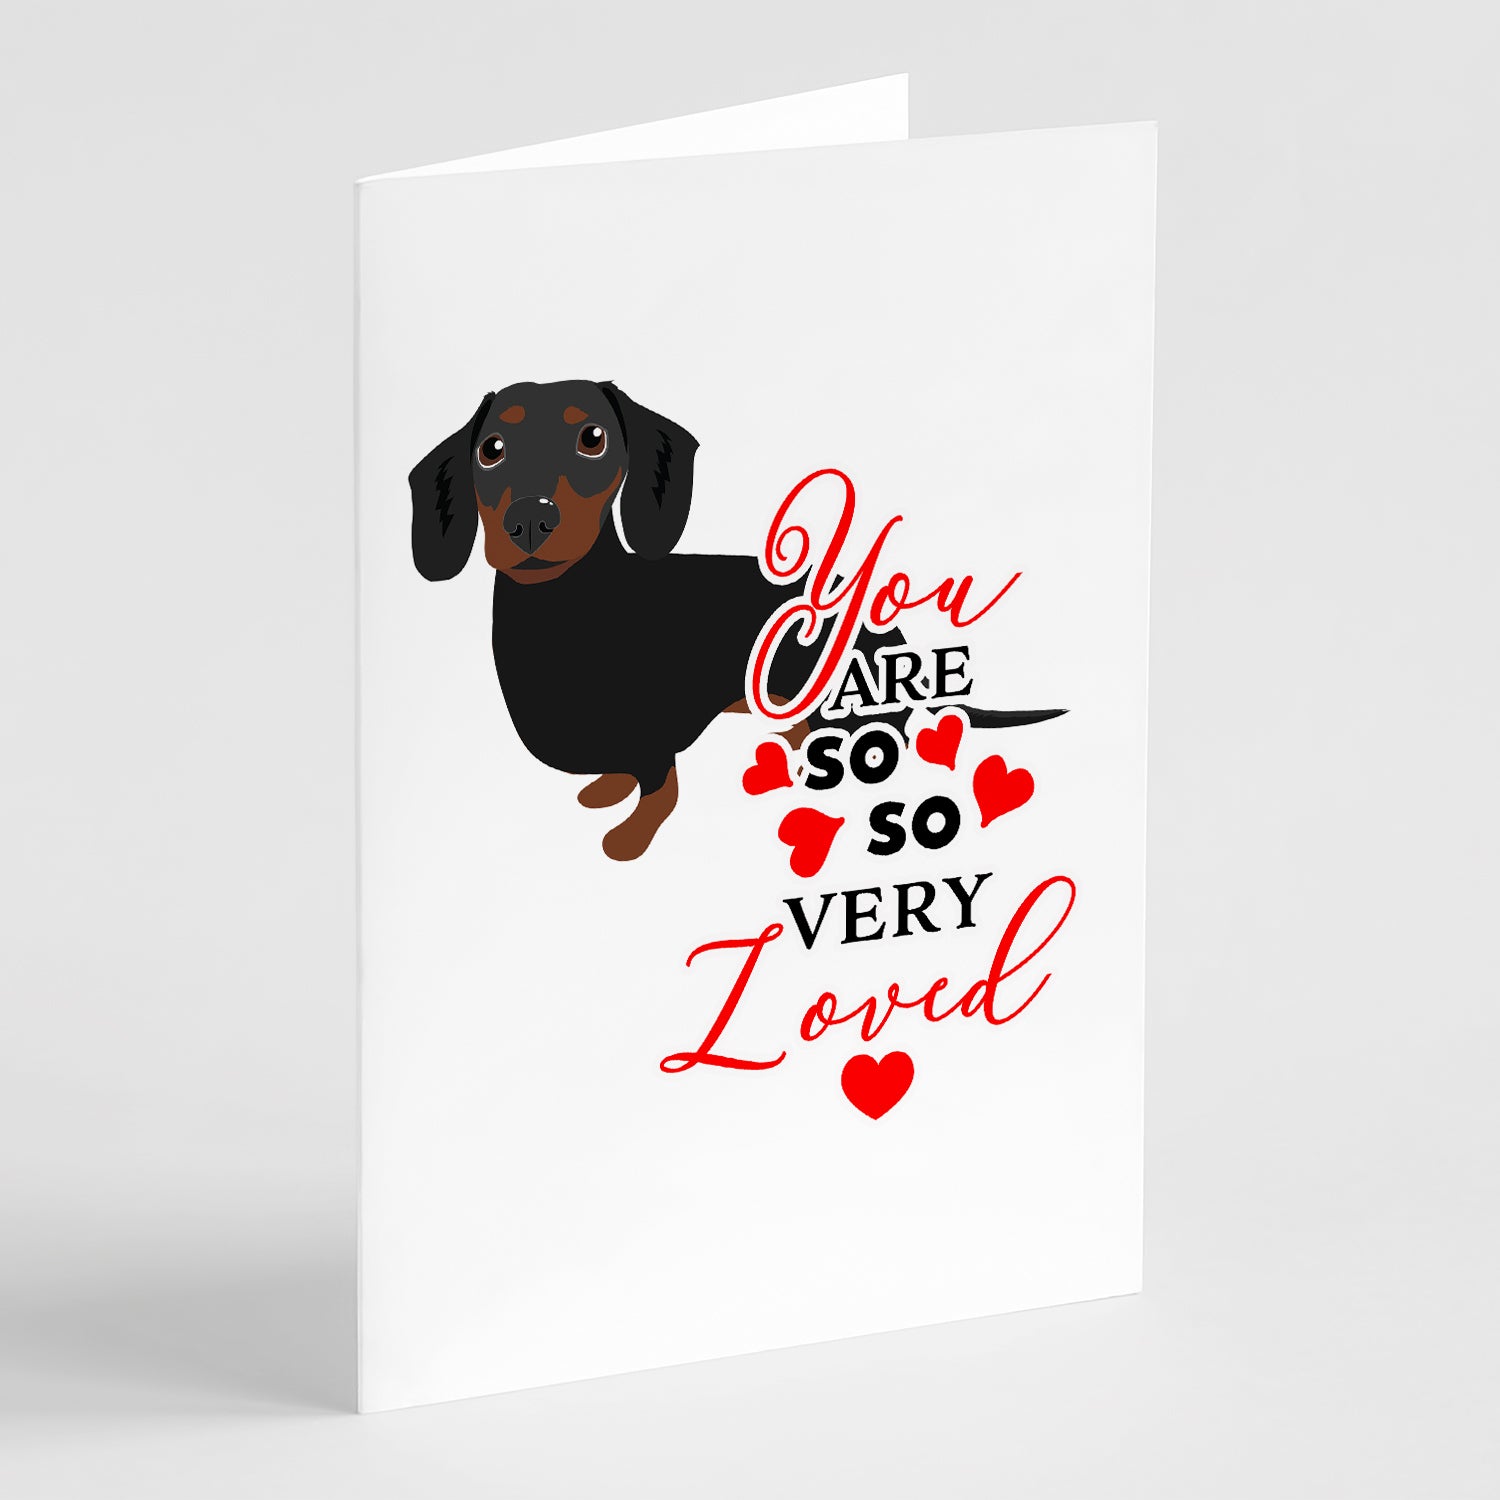 Buy this Dachshund Black and Tan #1so Loved Greeting Cards and Envelopes Pack of 8